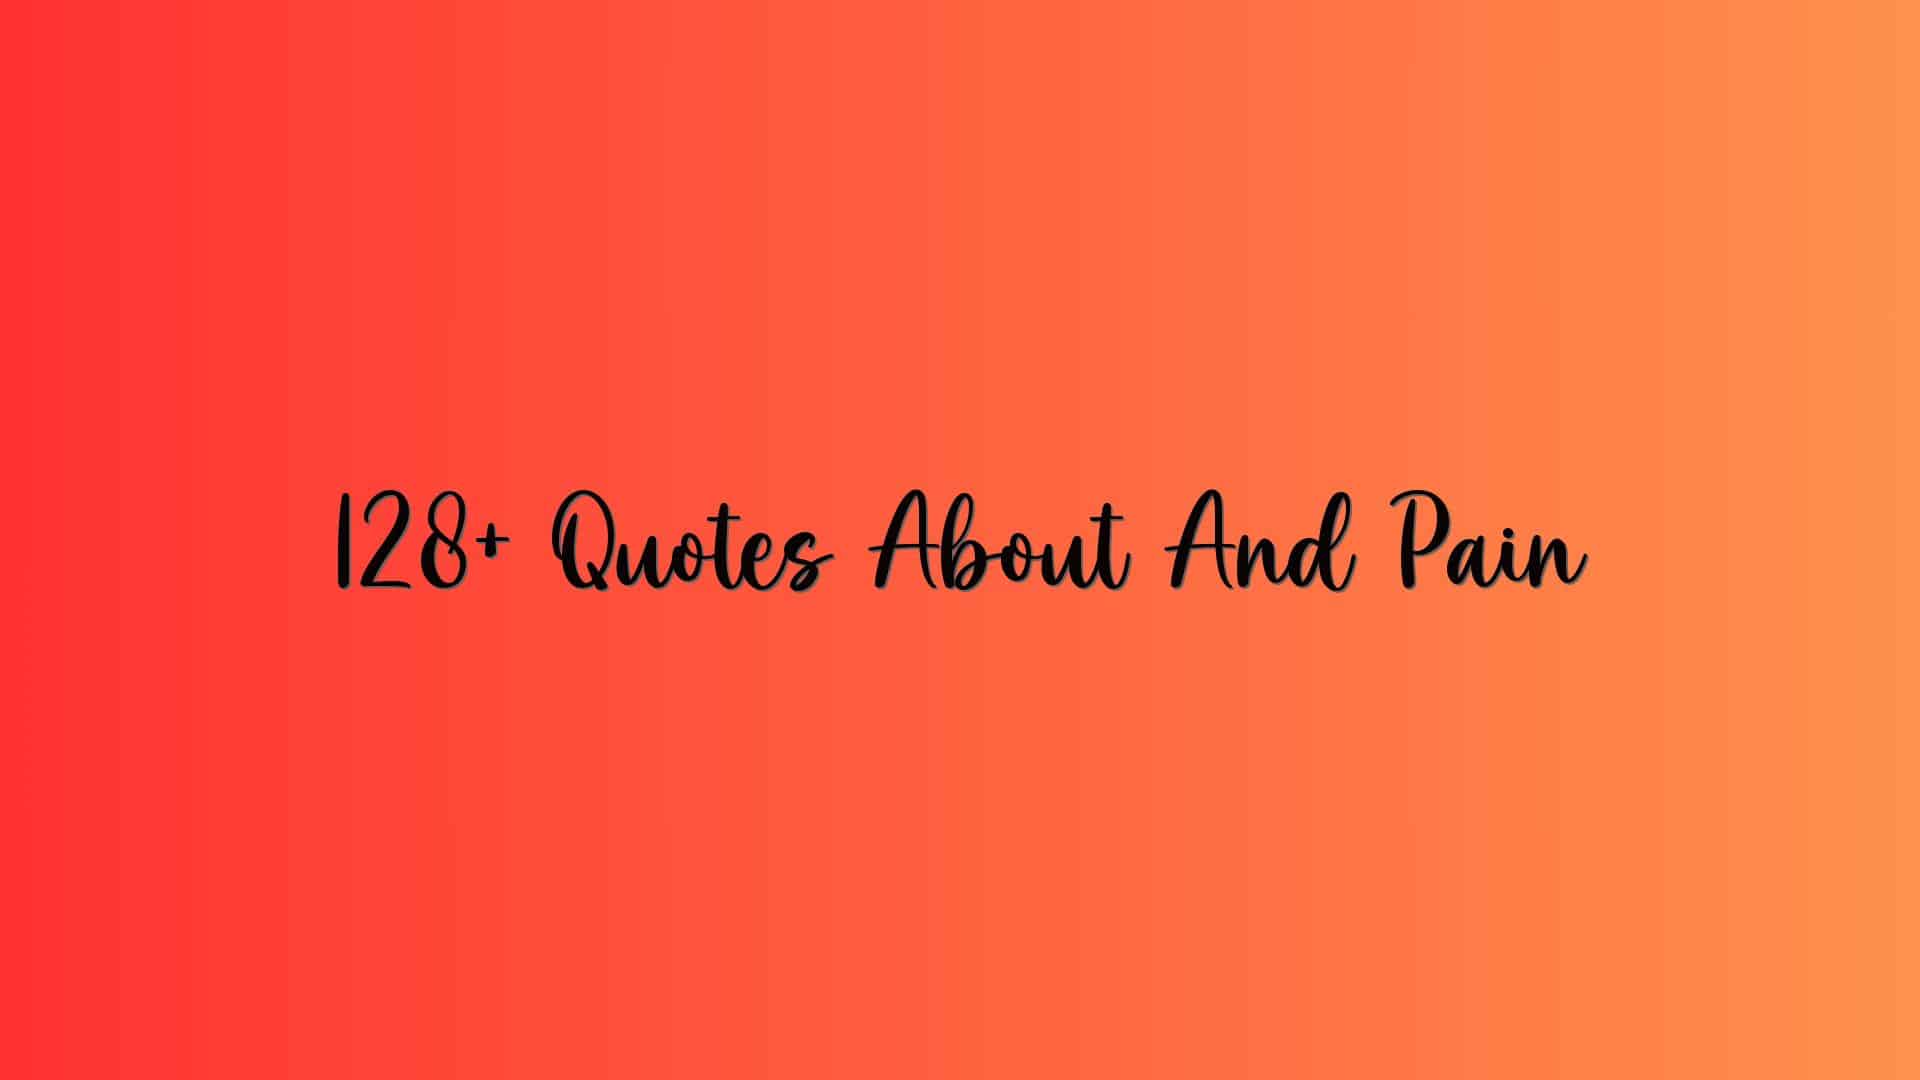 128+ Quotes About And Pain